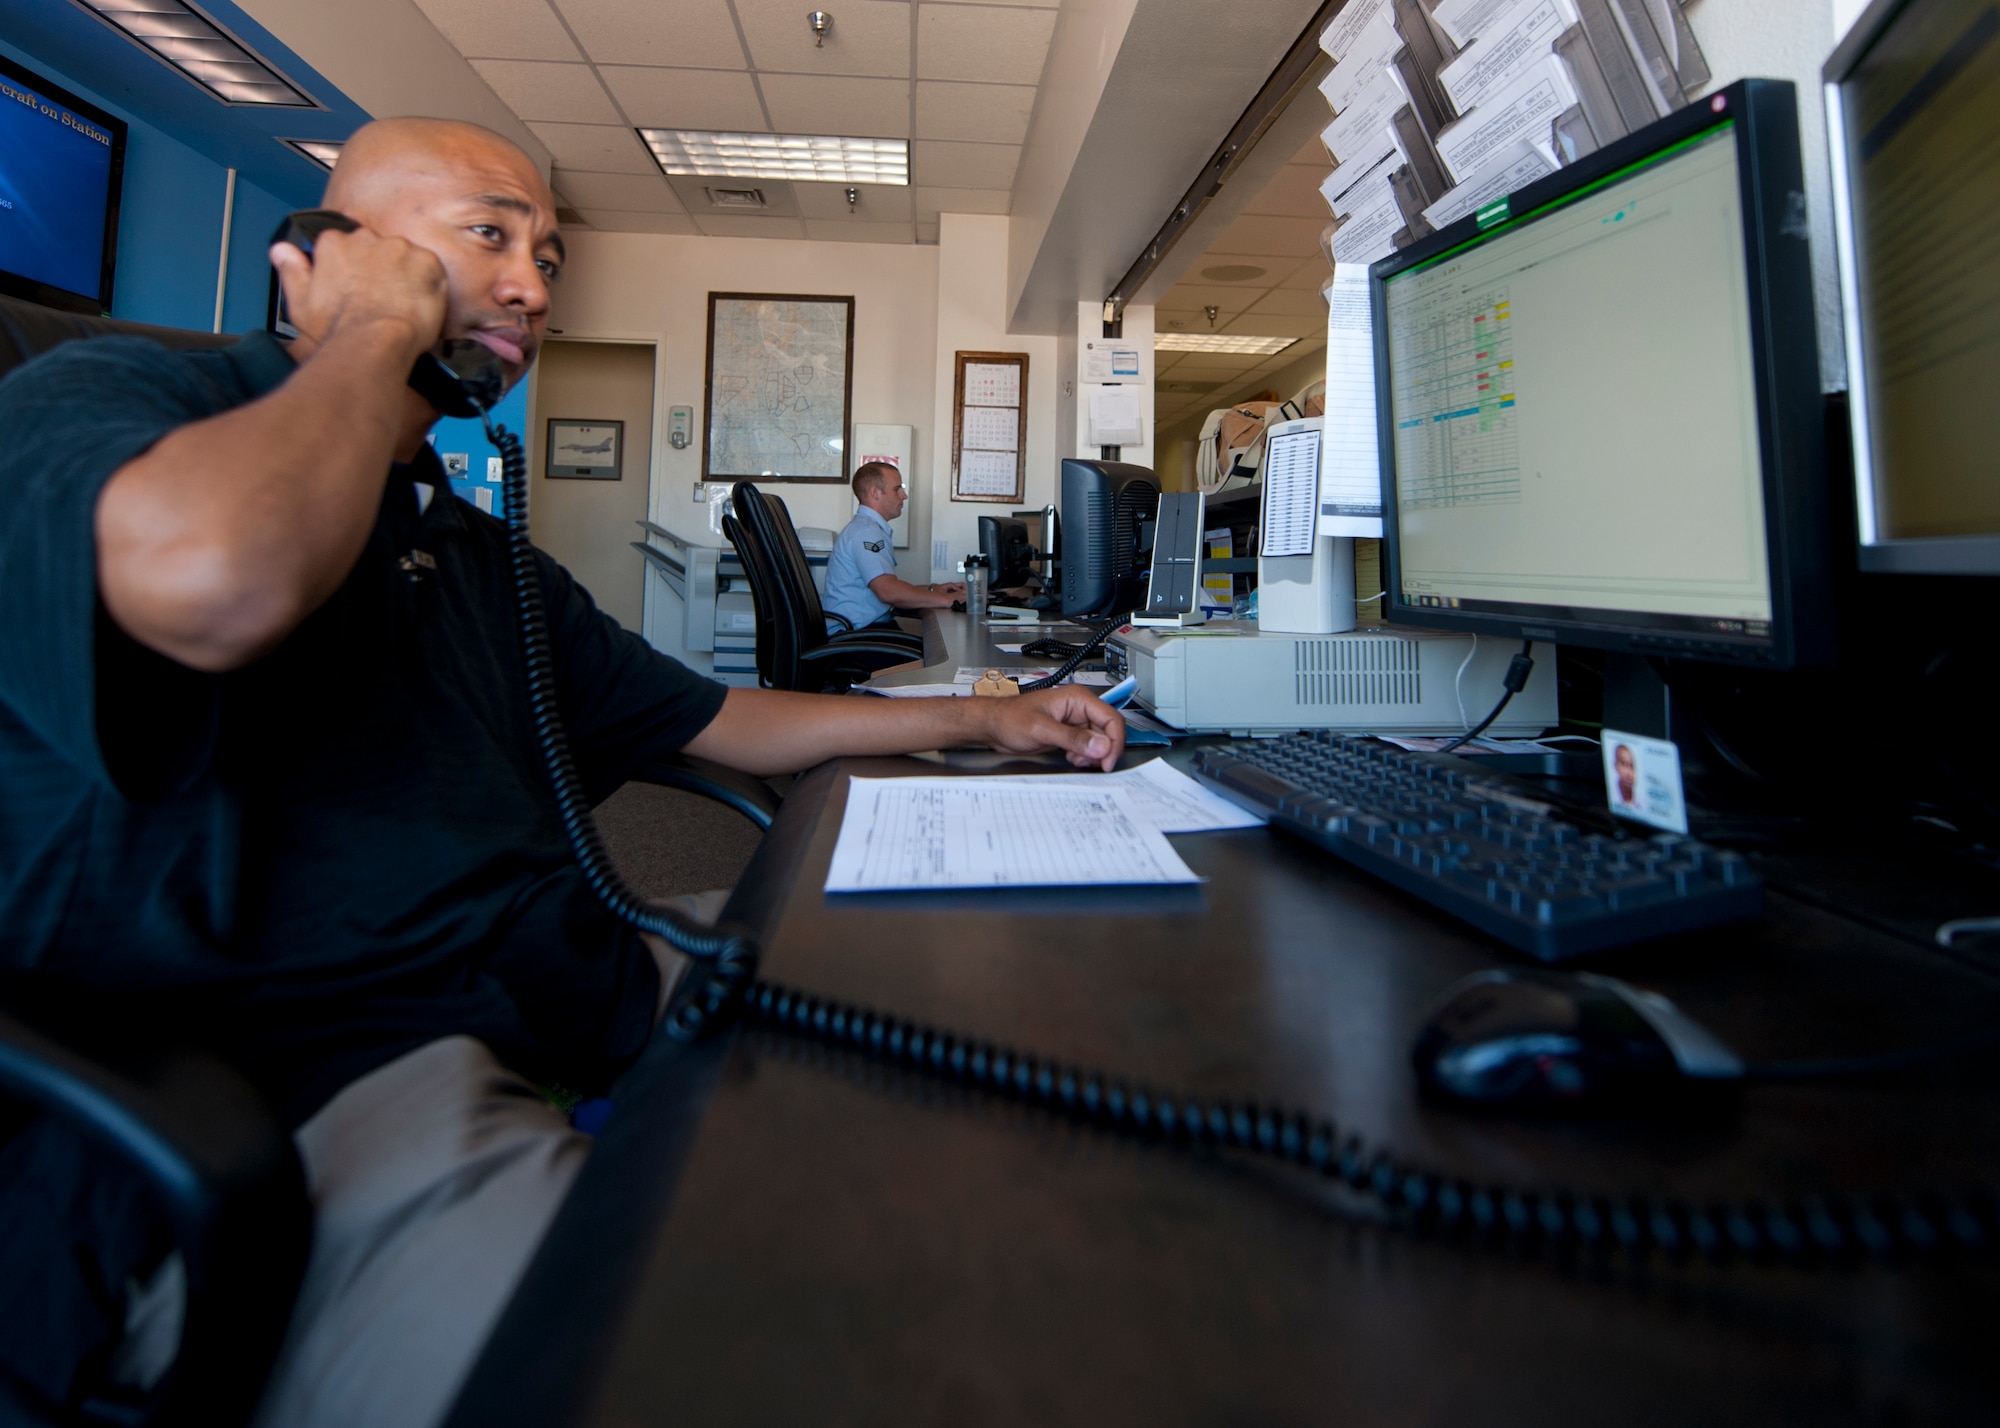 Julius Griffin, 49th Operations Support Squadron airfield manager, fields a phone call from the air traffic control tower at Holloman Air Force Base, N.M., June 26. Communications with air traffic control is an integral part of an airfield manager’s job. Airfield managers are responsible for relaying all the information they receive from air traffic control to the proper authorities. (U.S. Air Force photo by Airman 1st Class Daniel E. Liddicoet/Released)